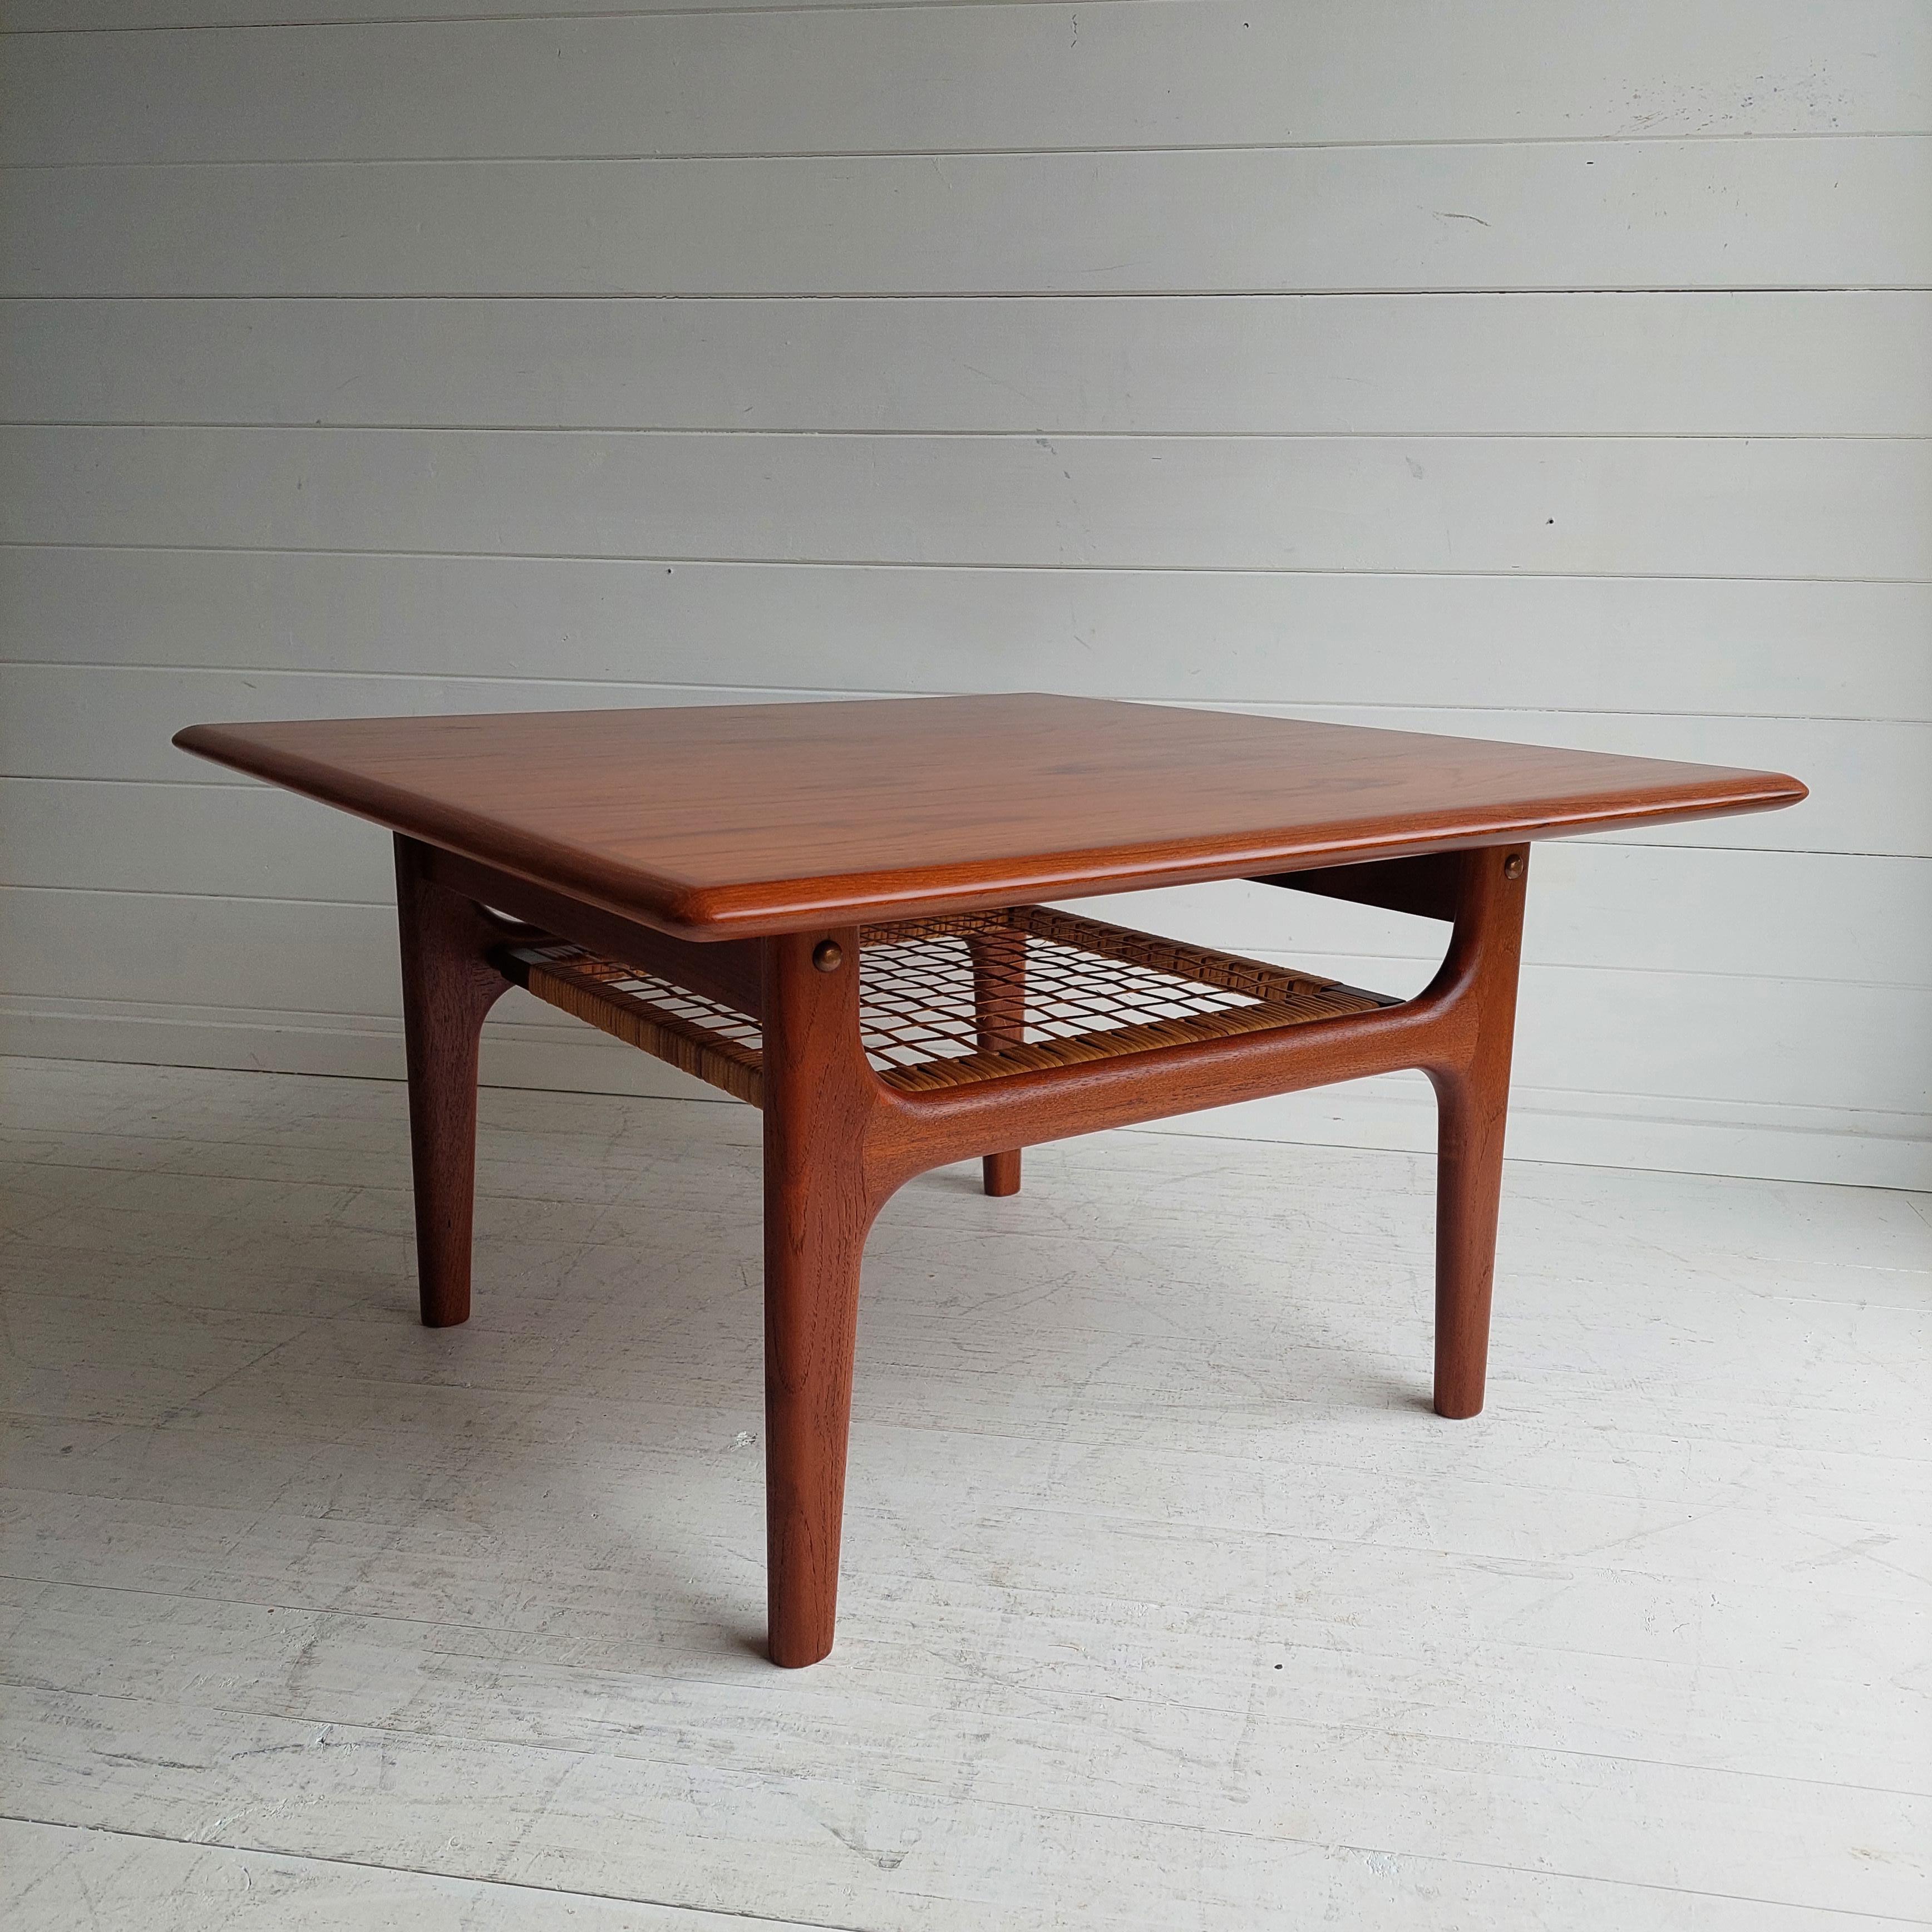 1960s Danish Mid-Century Modern teak coffee table features quality Scandinavian construction with a second cane tier for added storage for books or magazines. 

This coffee table is very stylish and would look great in any midcentury home or even